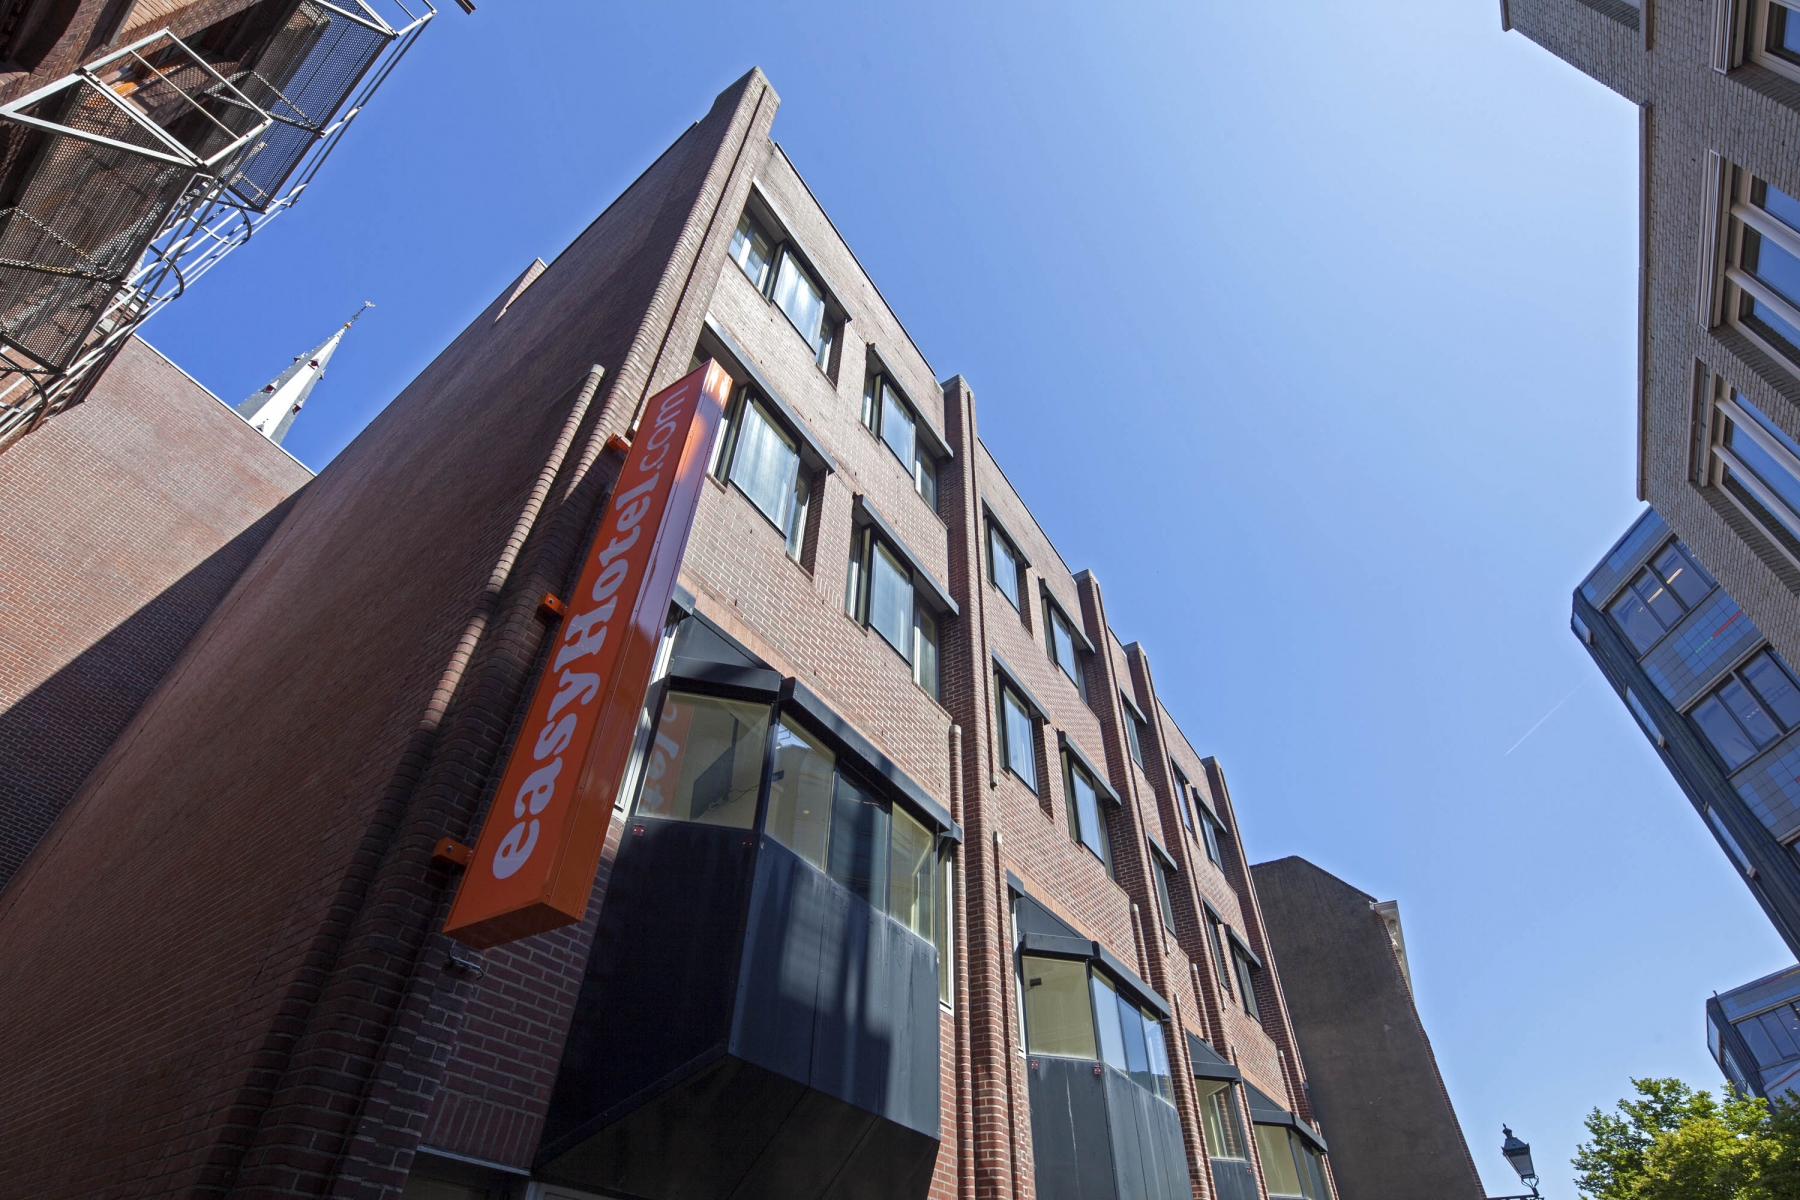 easyHotel The Hague City Centre <br/>51.00 ew <br/> <a href='http://vakantieoplossing.nl/outpage/?id=a27edd3e64af2d9c59c734f5f5545902' target='_blank'>View Details</a>